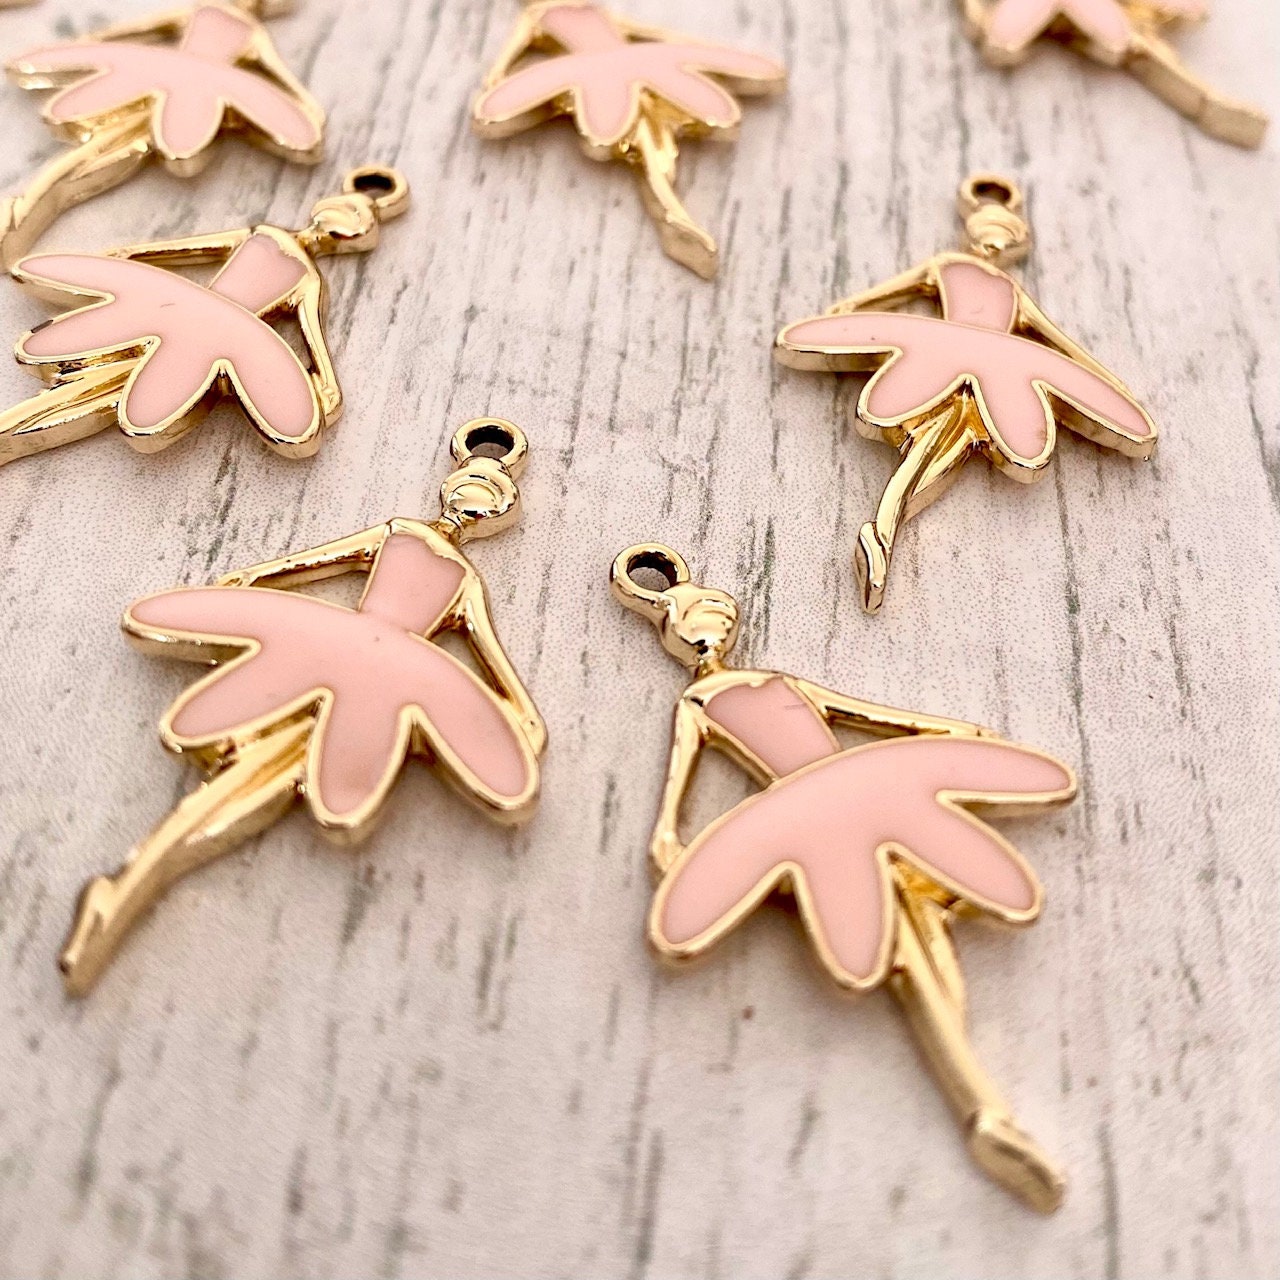 DanLingJewelry 10 pcs Craft Supplies Real 18K Gold Plated Beads Charms  Pendants Word Love Charms for Jewelry Making Crafting